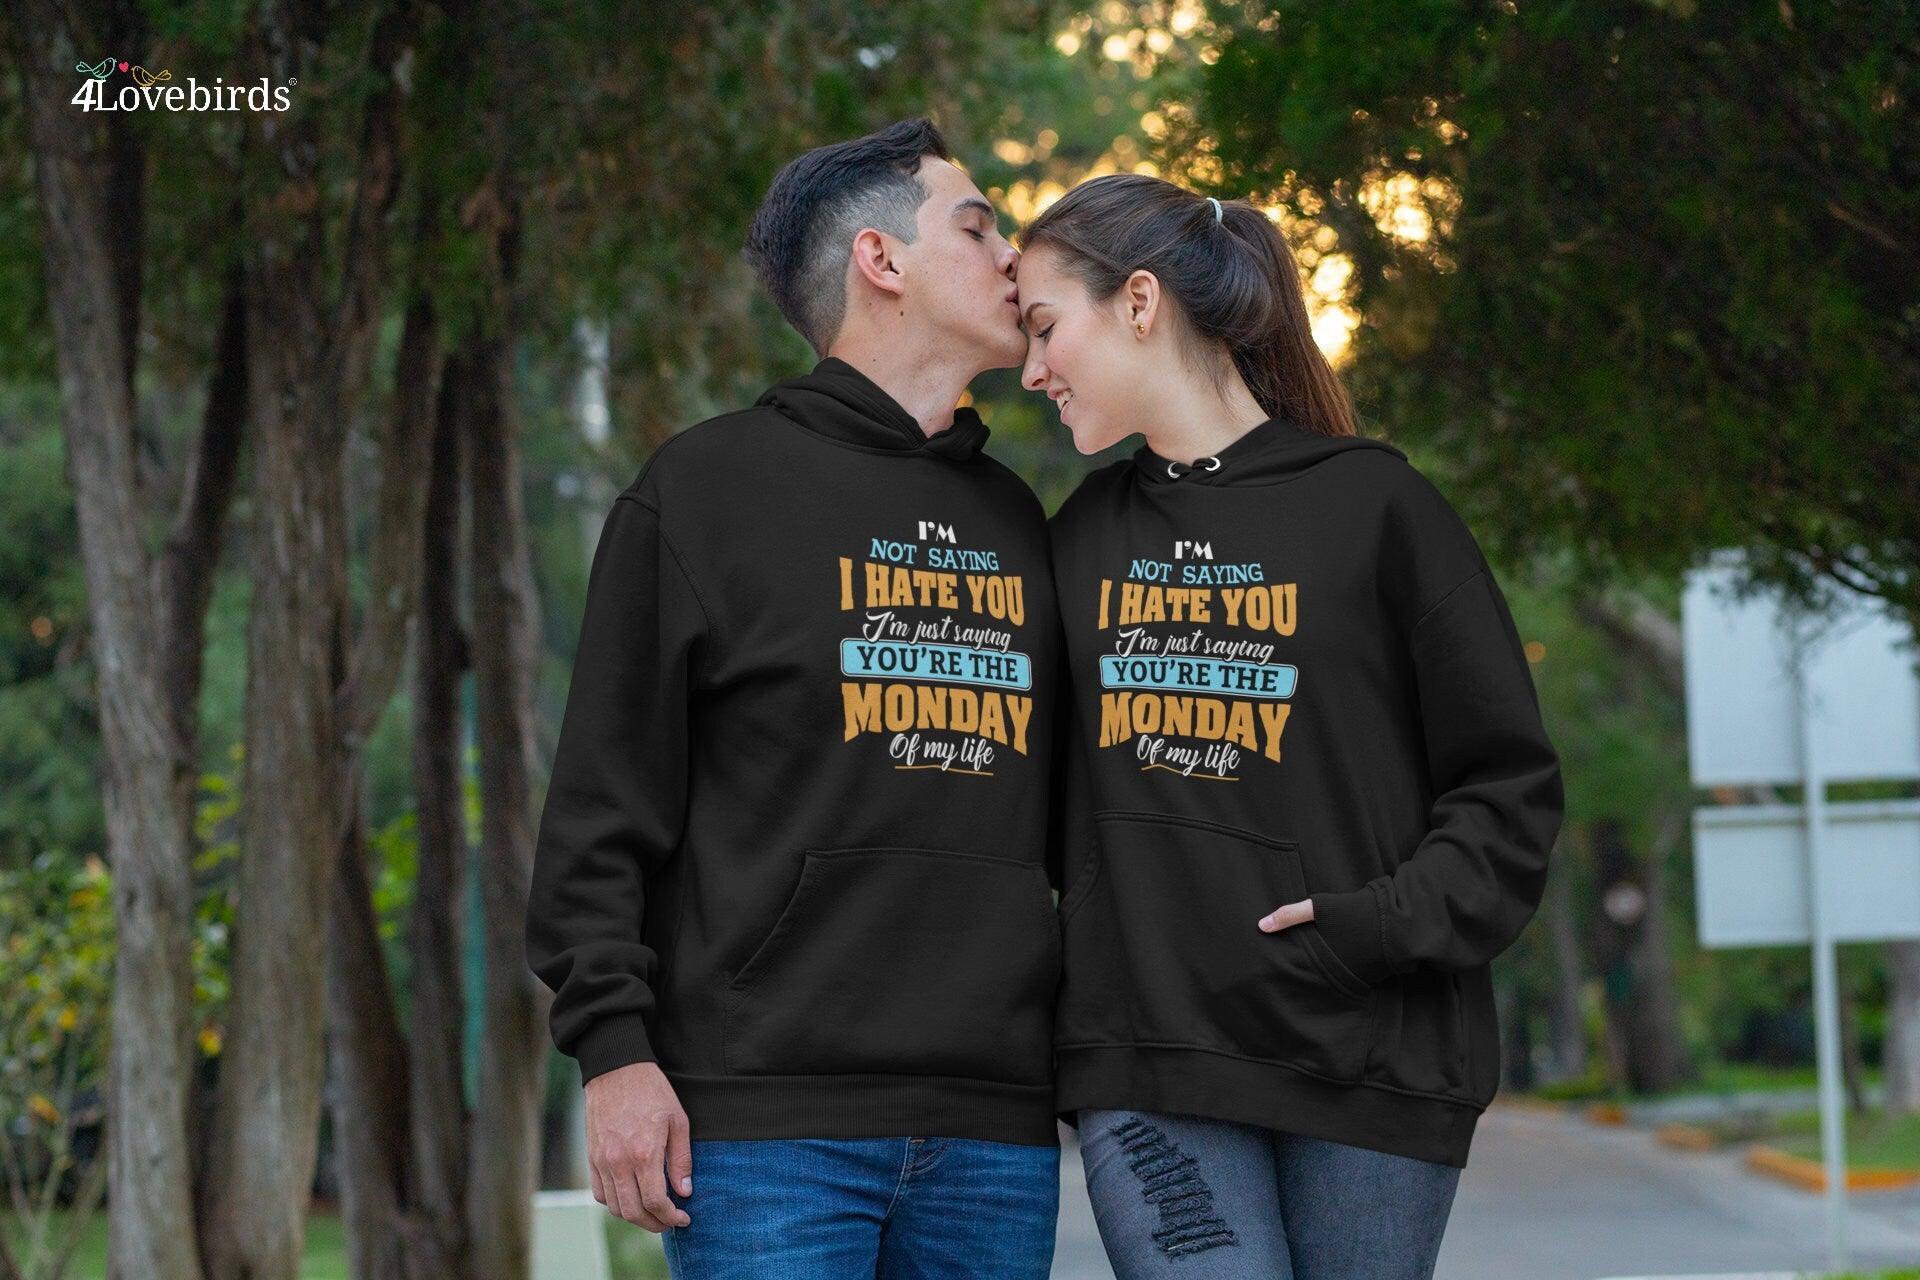 I'm not saying I hate you I'm just saying you're the monday of my Life Hoodie, Funny Couple Tshirt, Gift for Couple, Romantic Longsleeve - 4Lovebirds